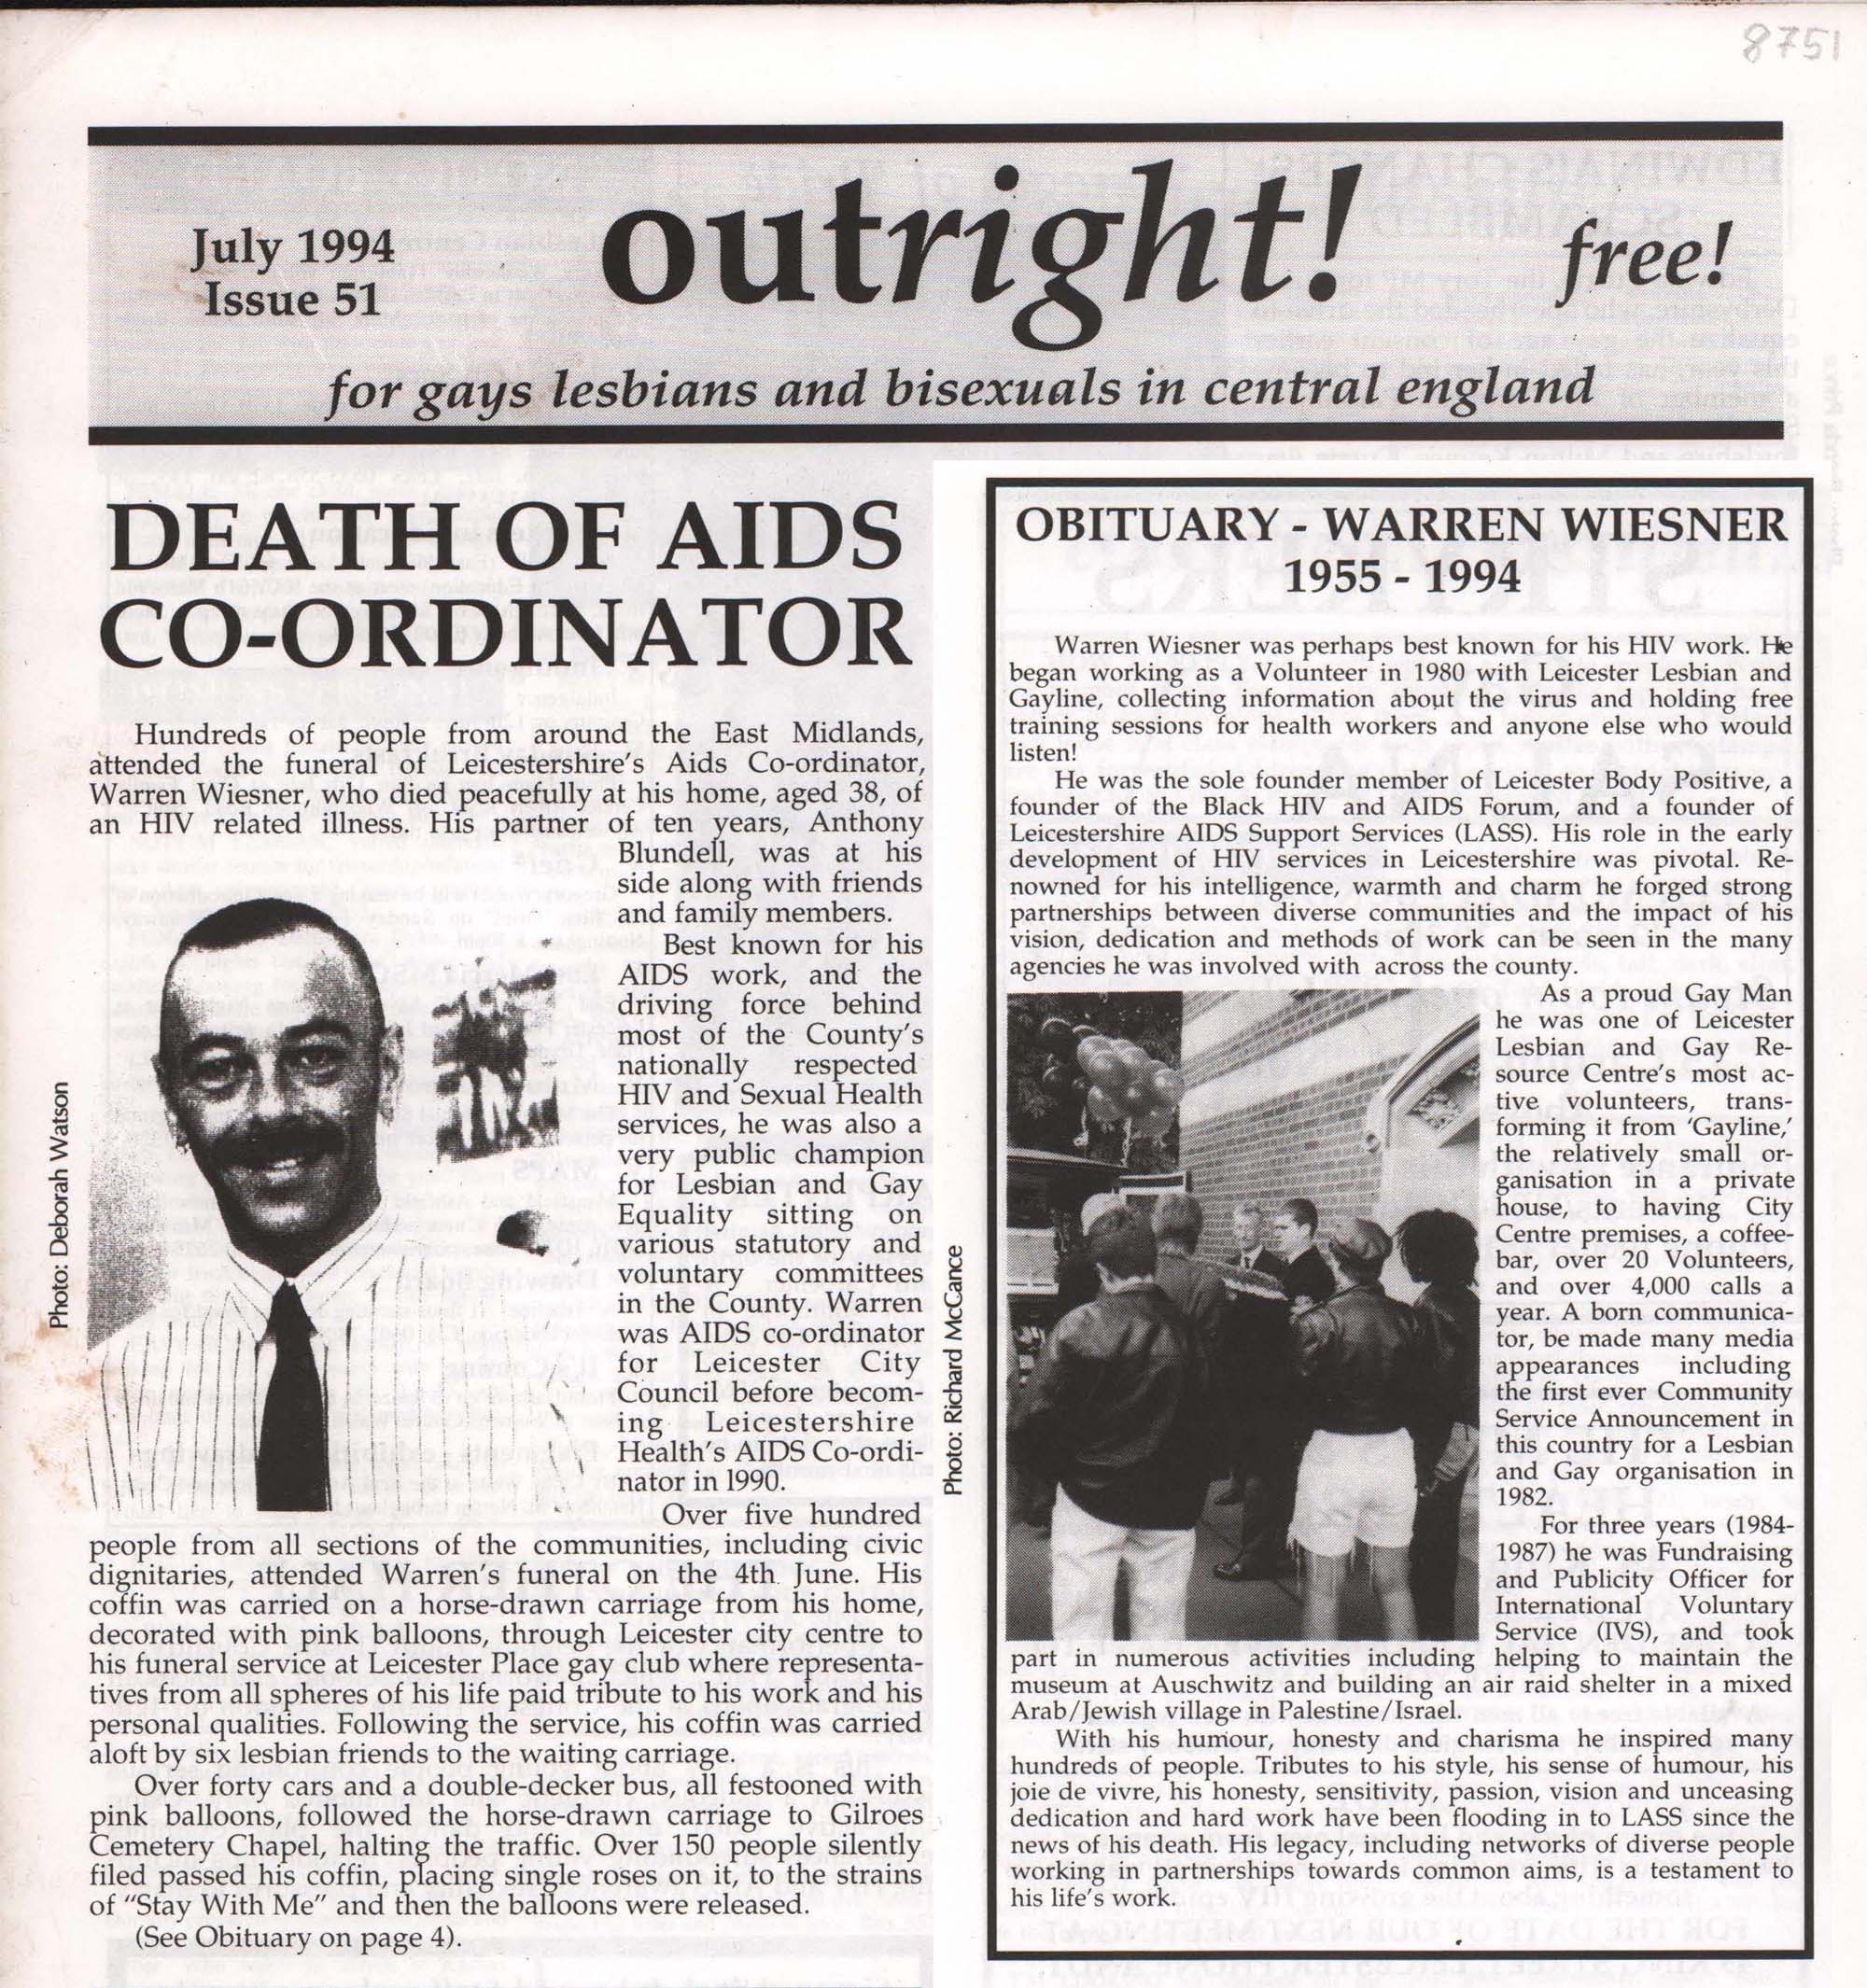 News article about the death of Warren Wiesner - "Outright!”, Issue 51, July 1994